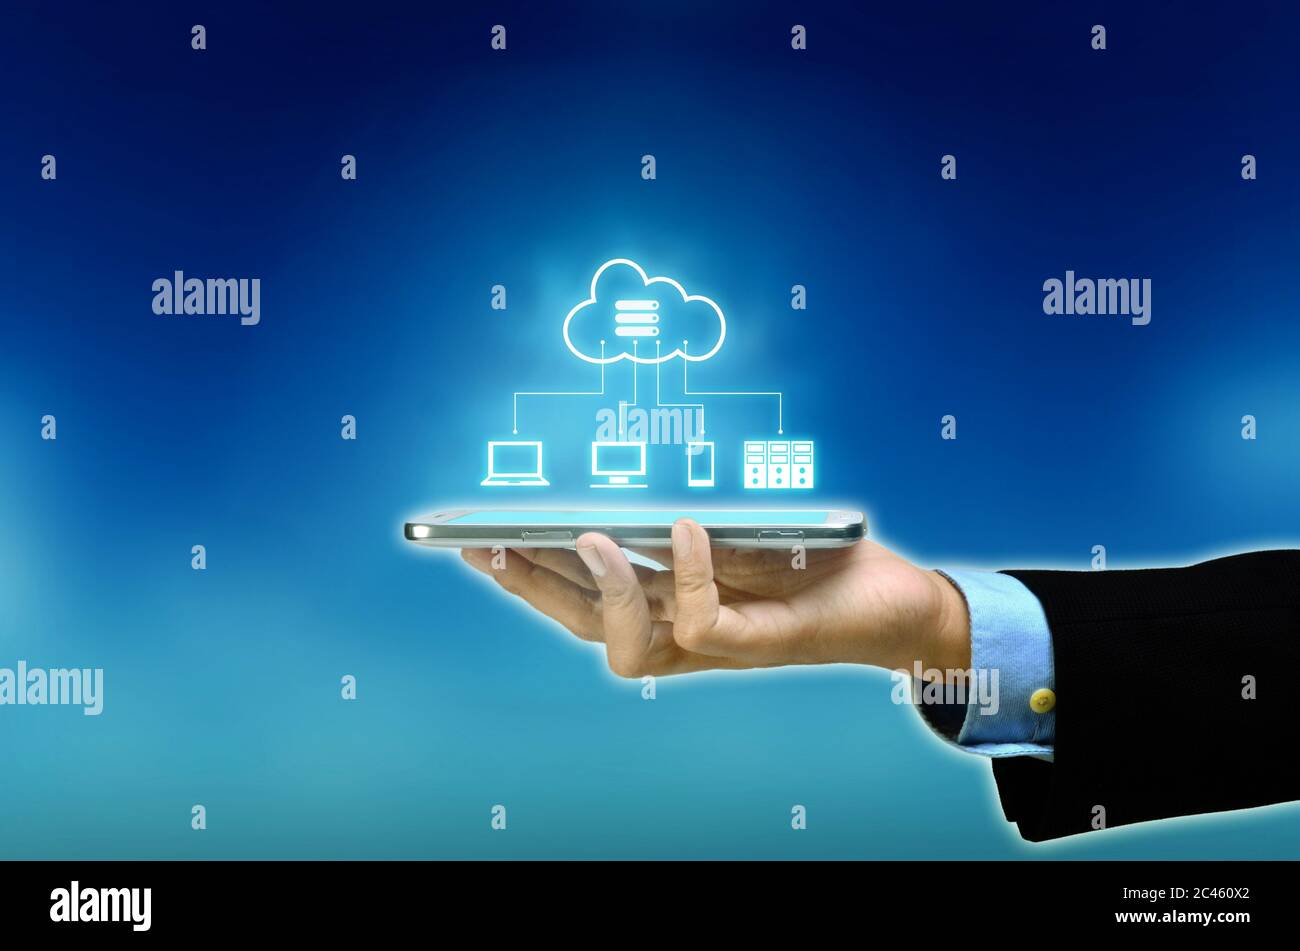 internet cloud server application and hosting on virtual network conceptual image Stock Photo